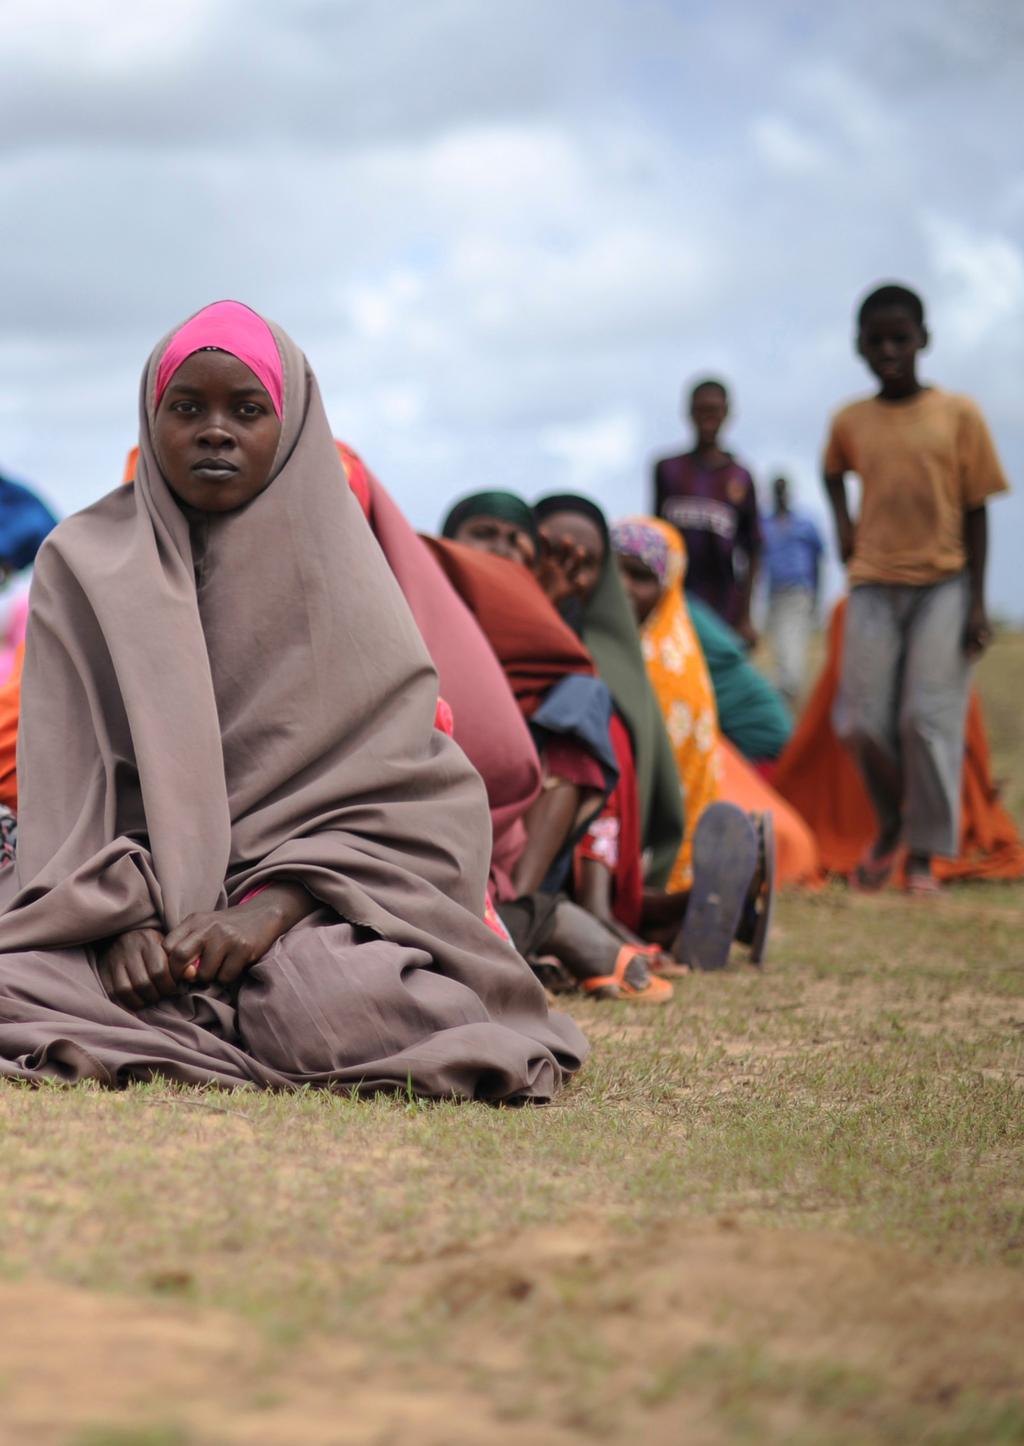 Displaced people waiting at a food distribution centre in Afgooye, Somalia, on 4 August 2013. Over 5,000 people were provided with food.